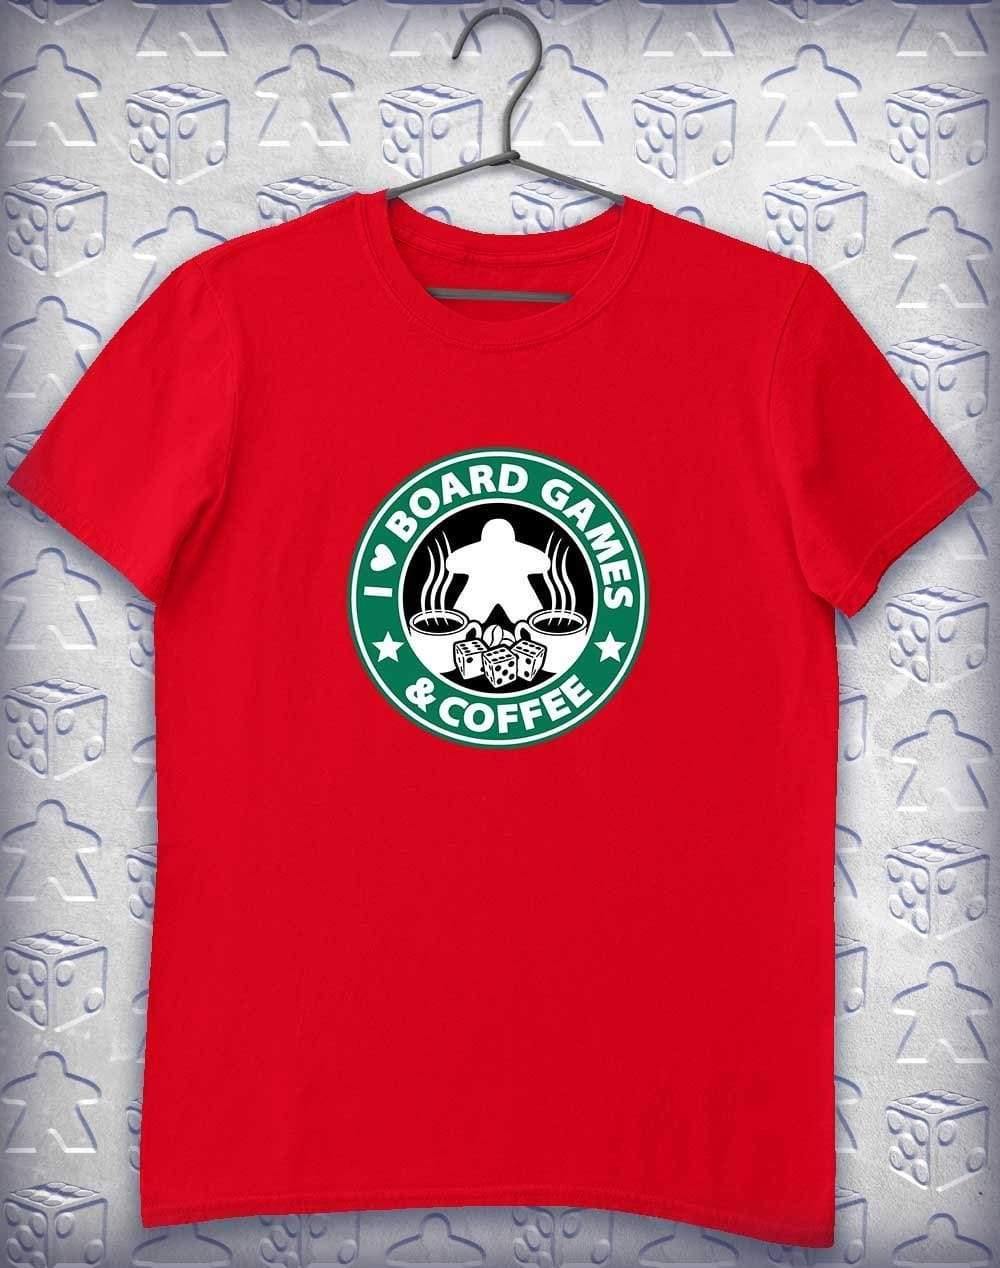 Board Games & Coffee Alphagamer T Shirt S / Red  - Off World Tees